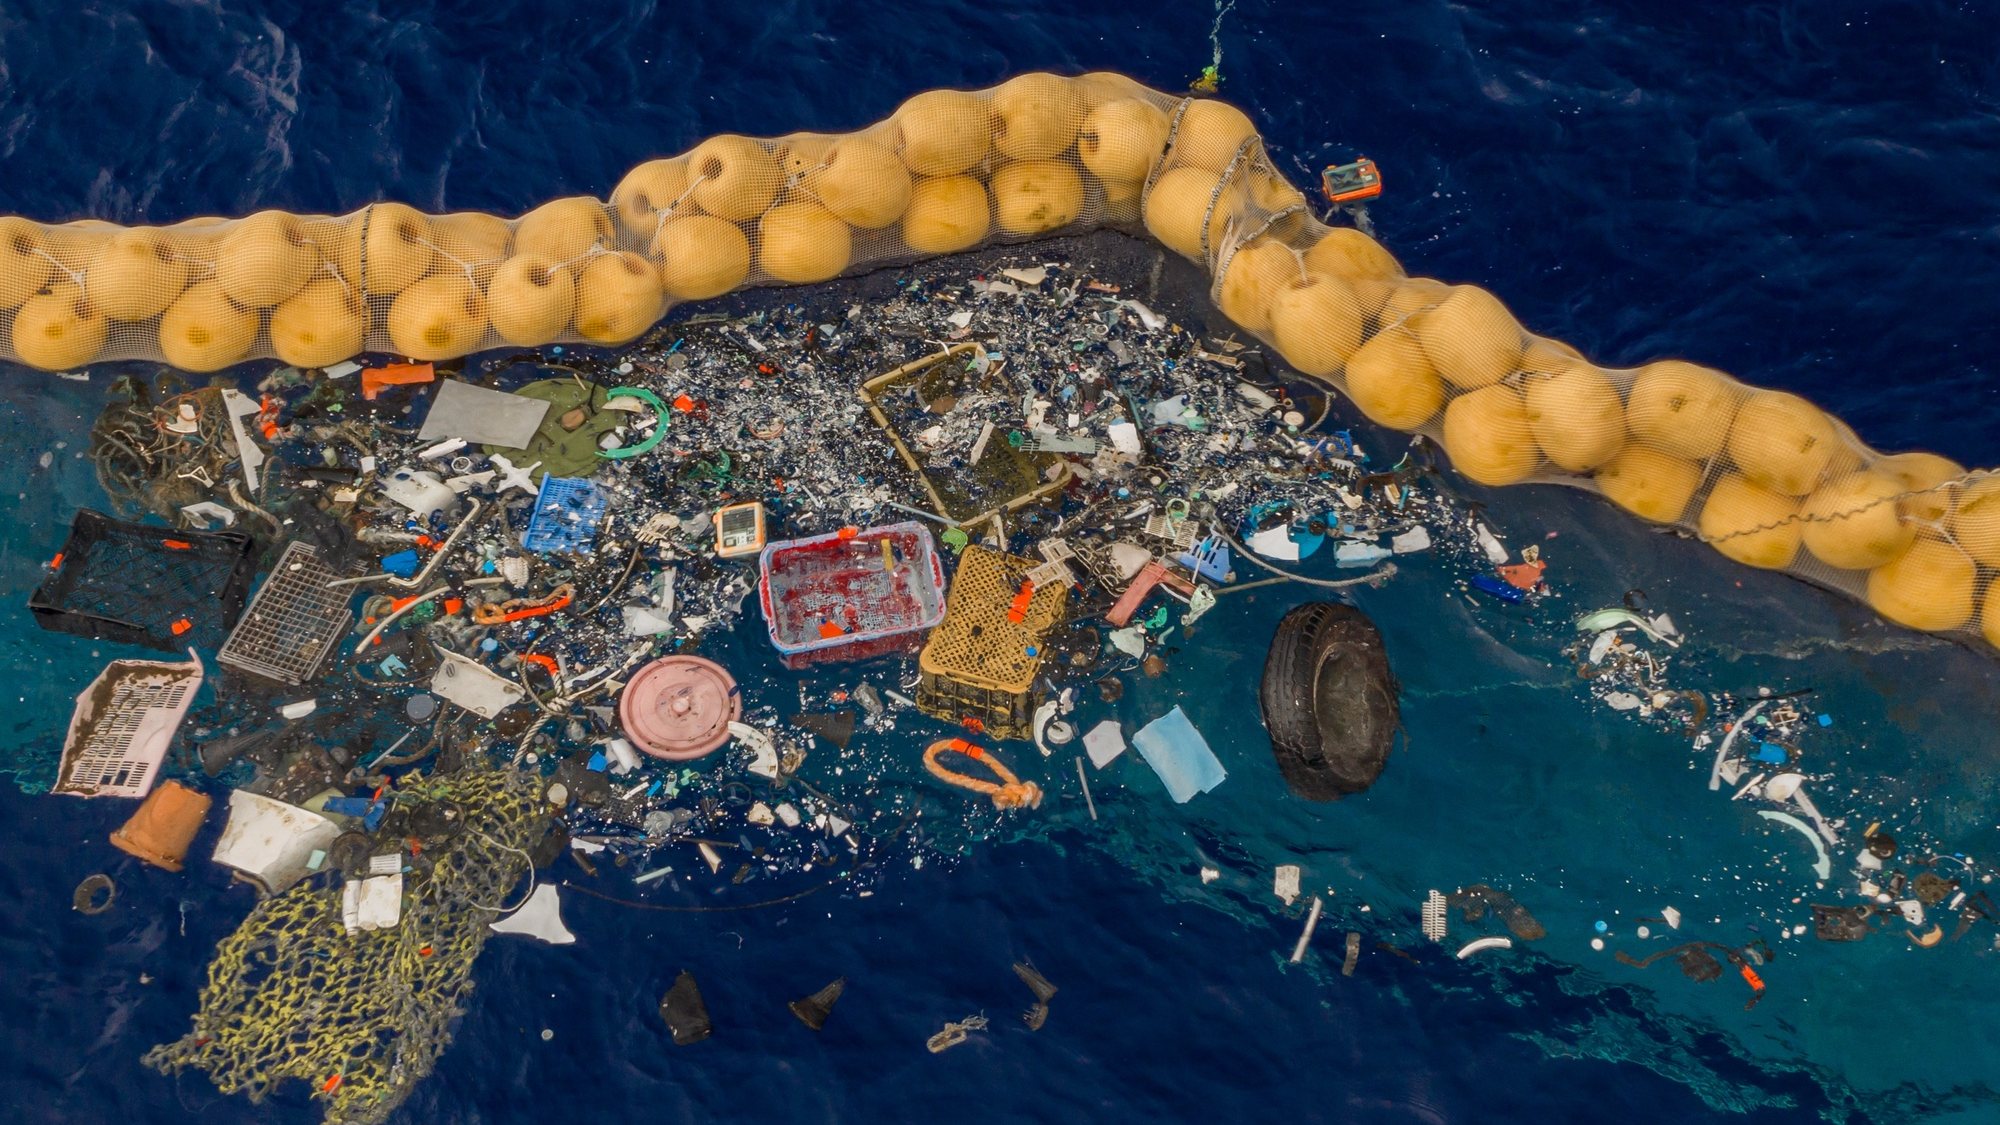 epa07892087 A handout photo made available by The Ocean Cleanup shows the company&#039;s ocean cleanup prototype System 001/B capturing plastic debris in the Great Pacific Garbage Patch, in the Pacific Ocean, 30 September 2019 (issued 03 October 2019). The self-contained system uses natural currents of the sea to passively collect plastic debris in an effort to reduce waste in the ocean. According to the Ocean Cleanup, the system is also able to filter microplastics as small as 1mm.  EPA/THE OCEAN CLEANUP HANDOUT  HANDOUT EDITORIAL USE ONLY/NO SALES